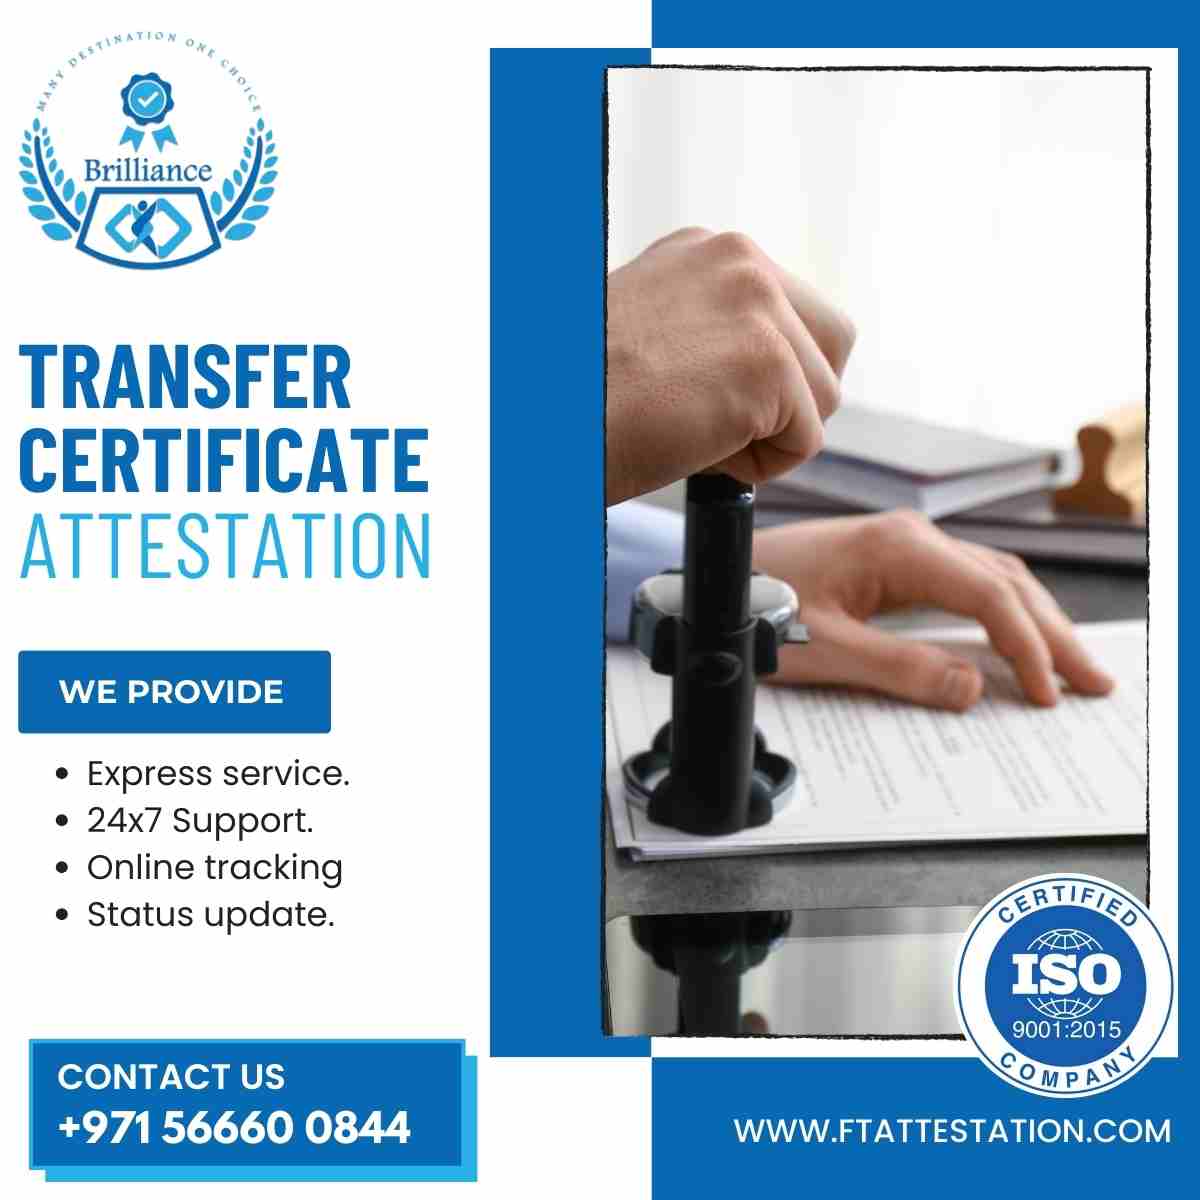 Professional Transfer Certificate Attestation Services in UAE